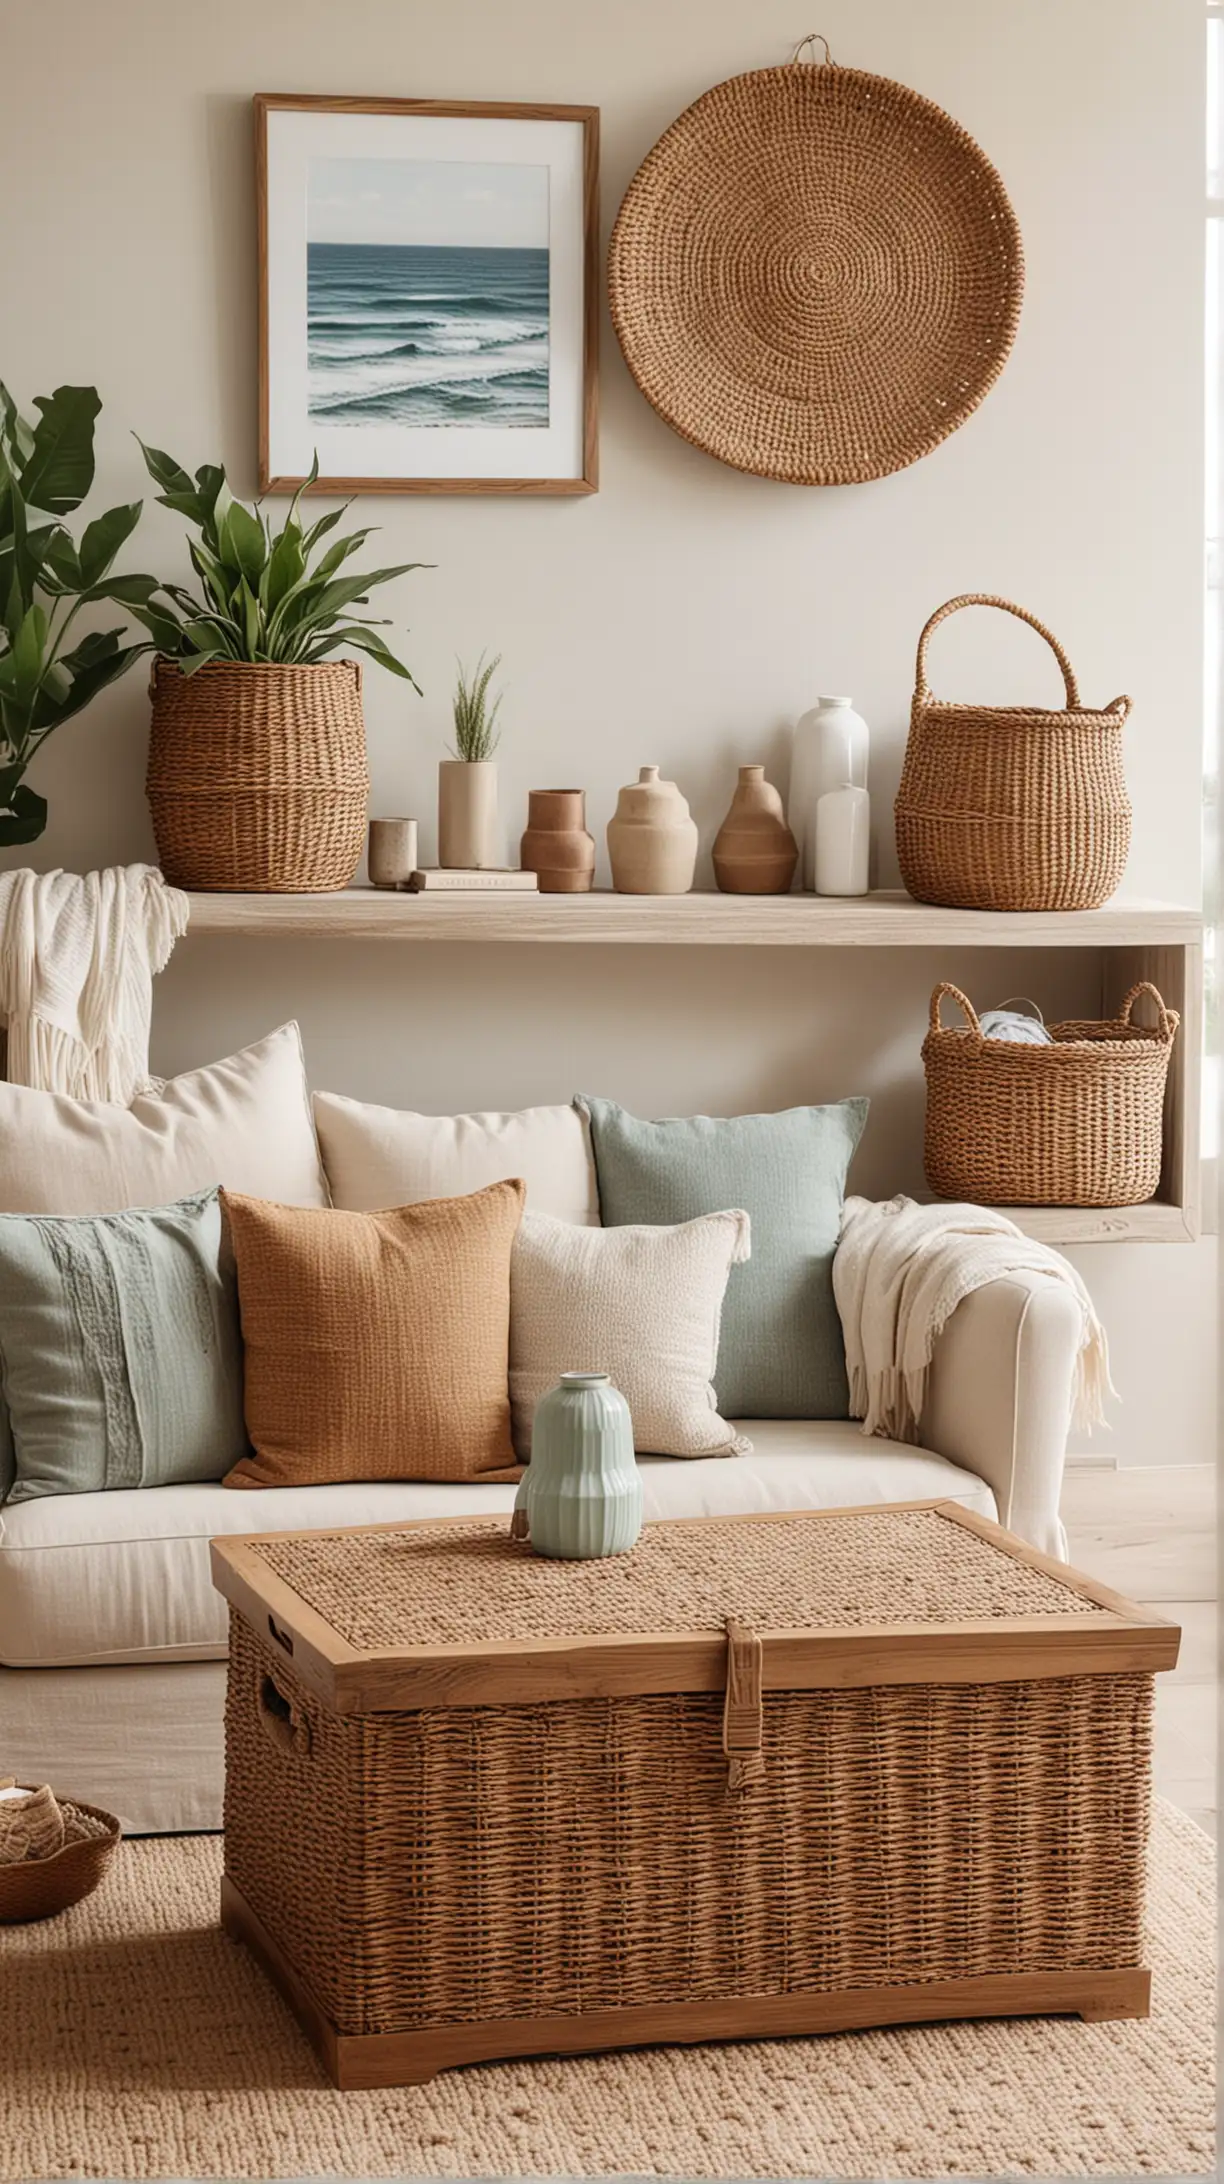 A boho-coastal living room with wicker baskets used for storage, adding a functional yet stylish touch to the space, complemented by neutral, earthy decor.